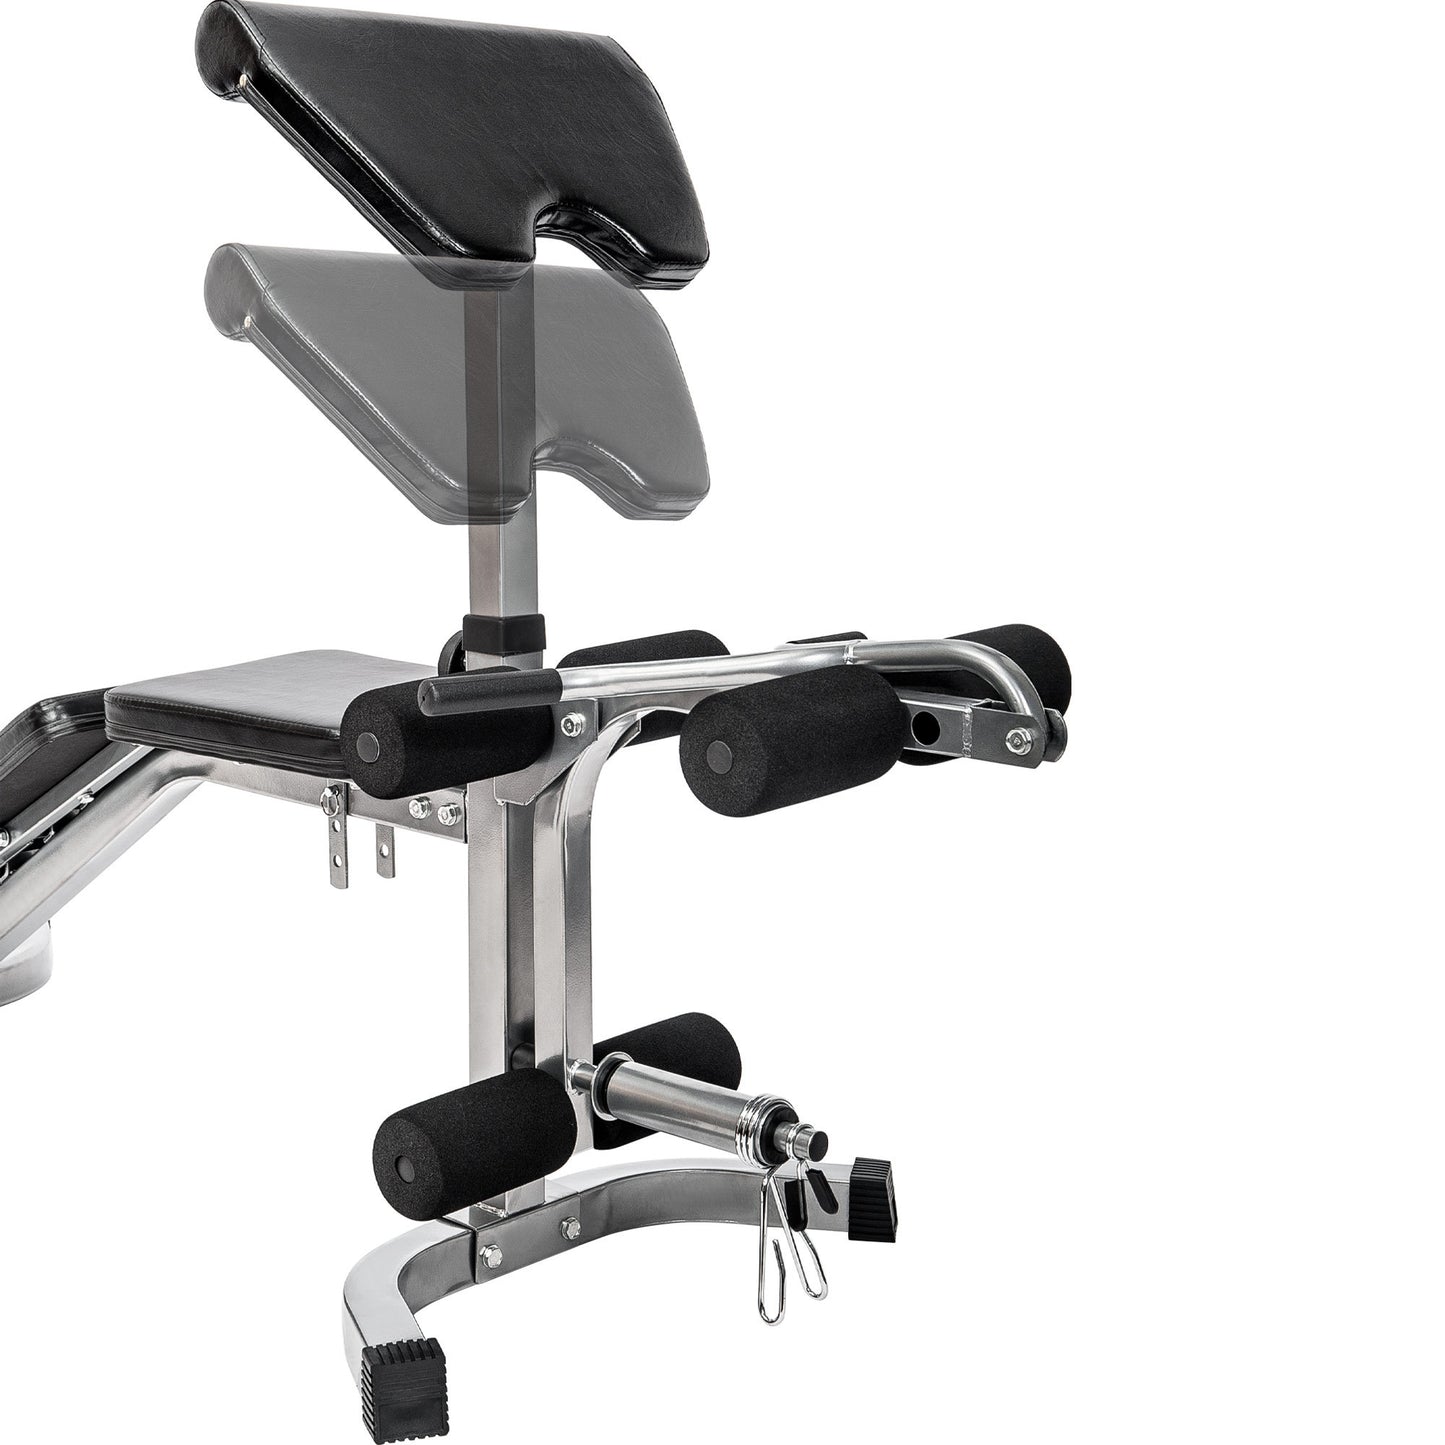 6+3 Positions Adjustable Weight Bench with Leg Extension - Olympic Utility Benches with Preacher Curl